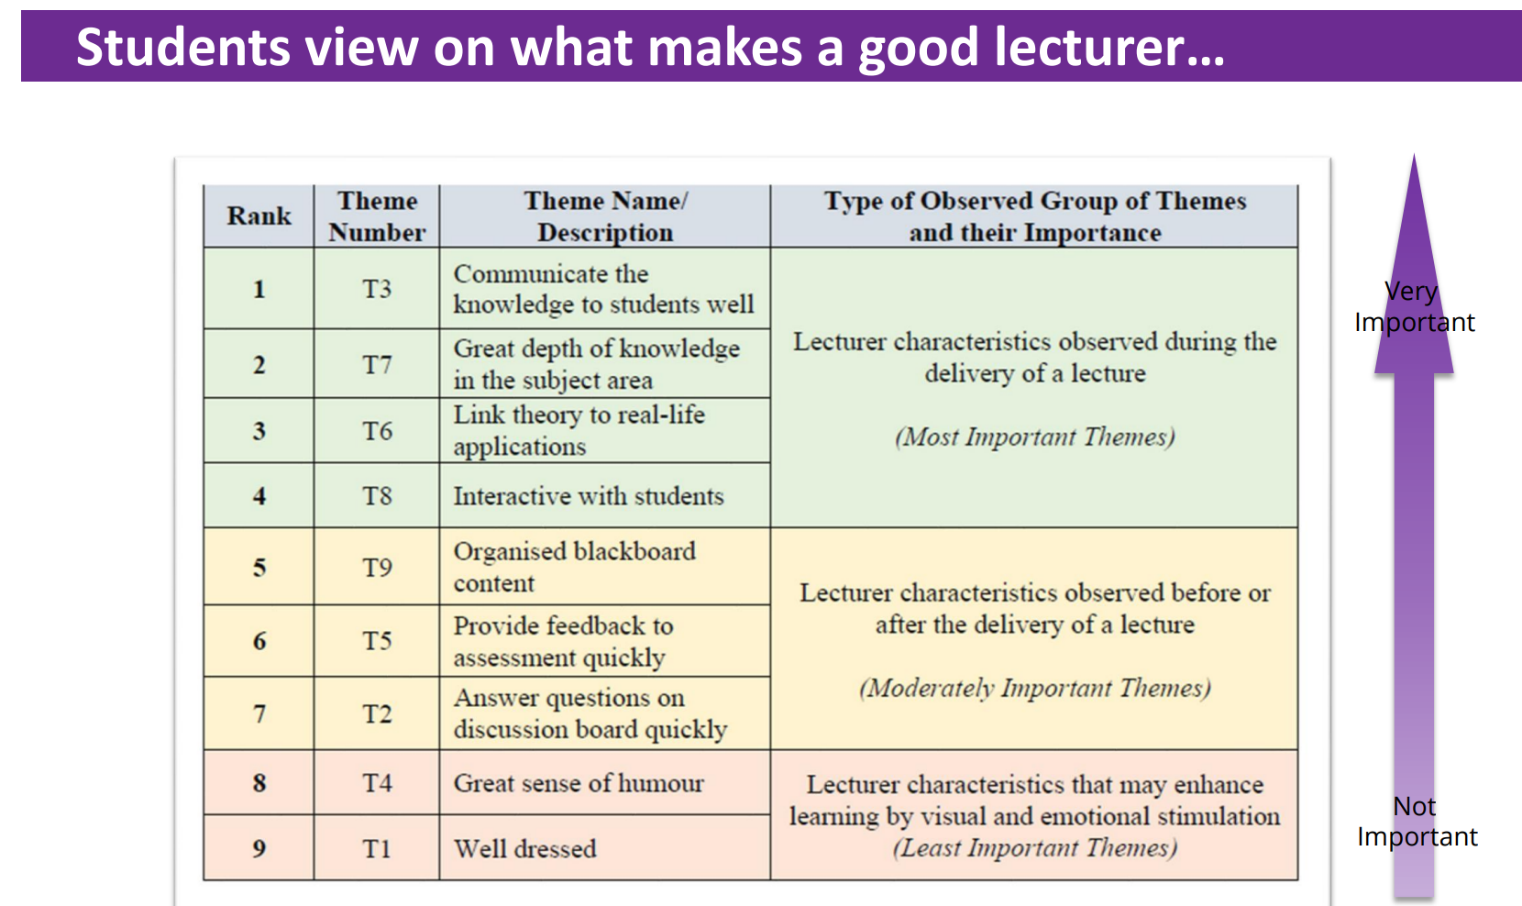 Screenshot of student feedback summary of what makes a good lecturer